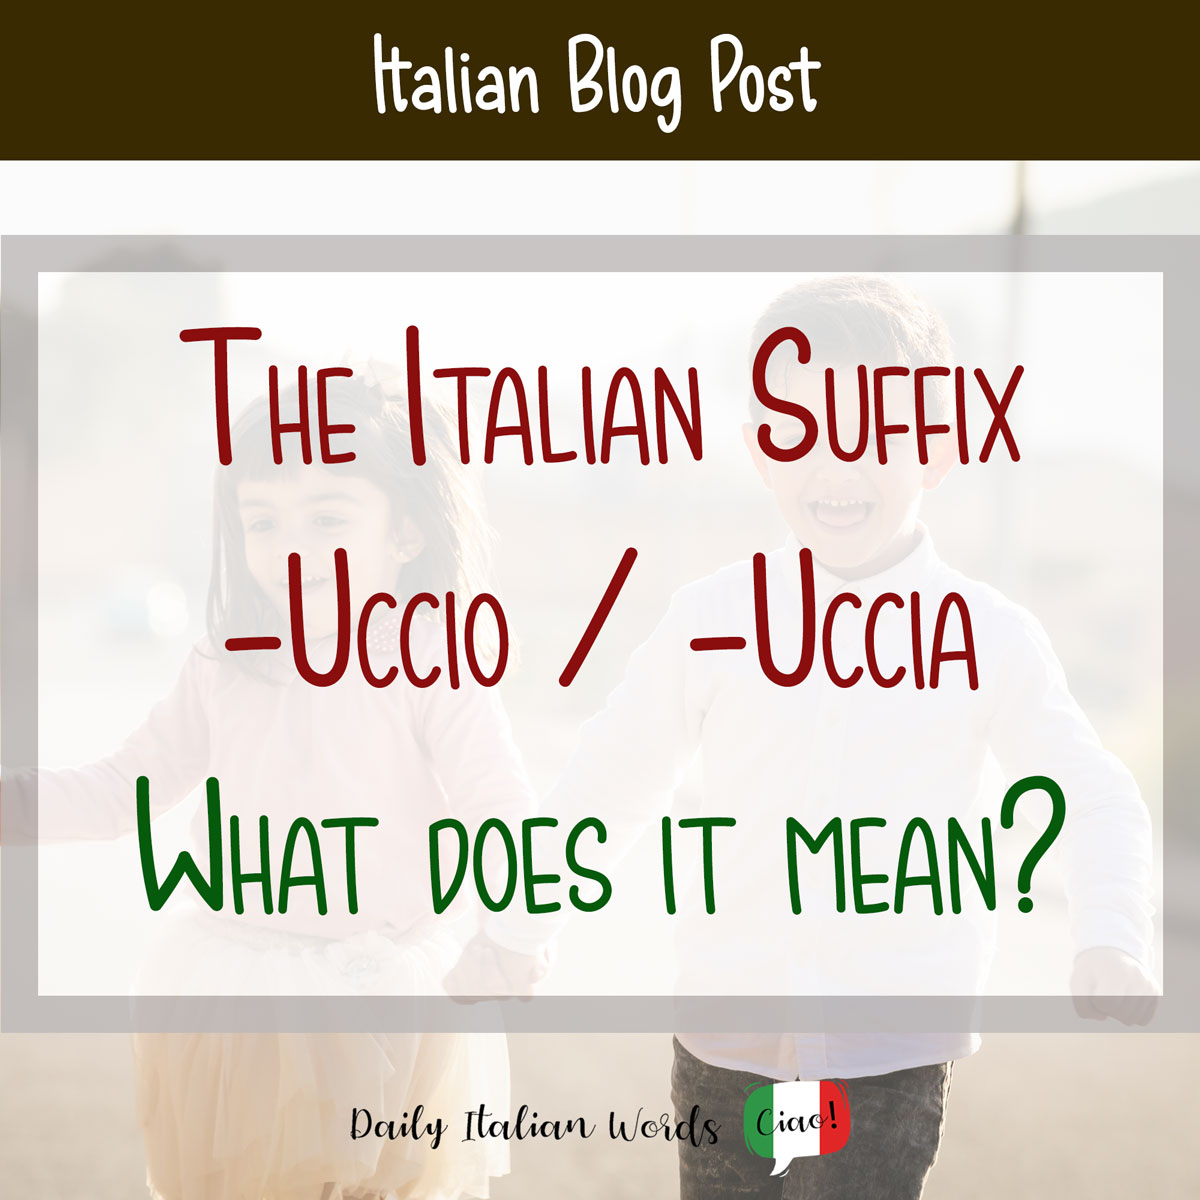 The Italian Suffix “-uccio/a” – What does it imply?